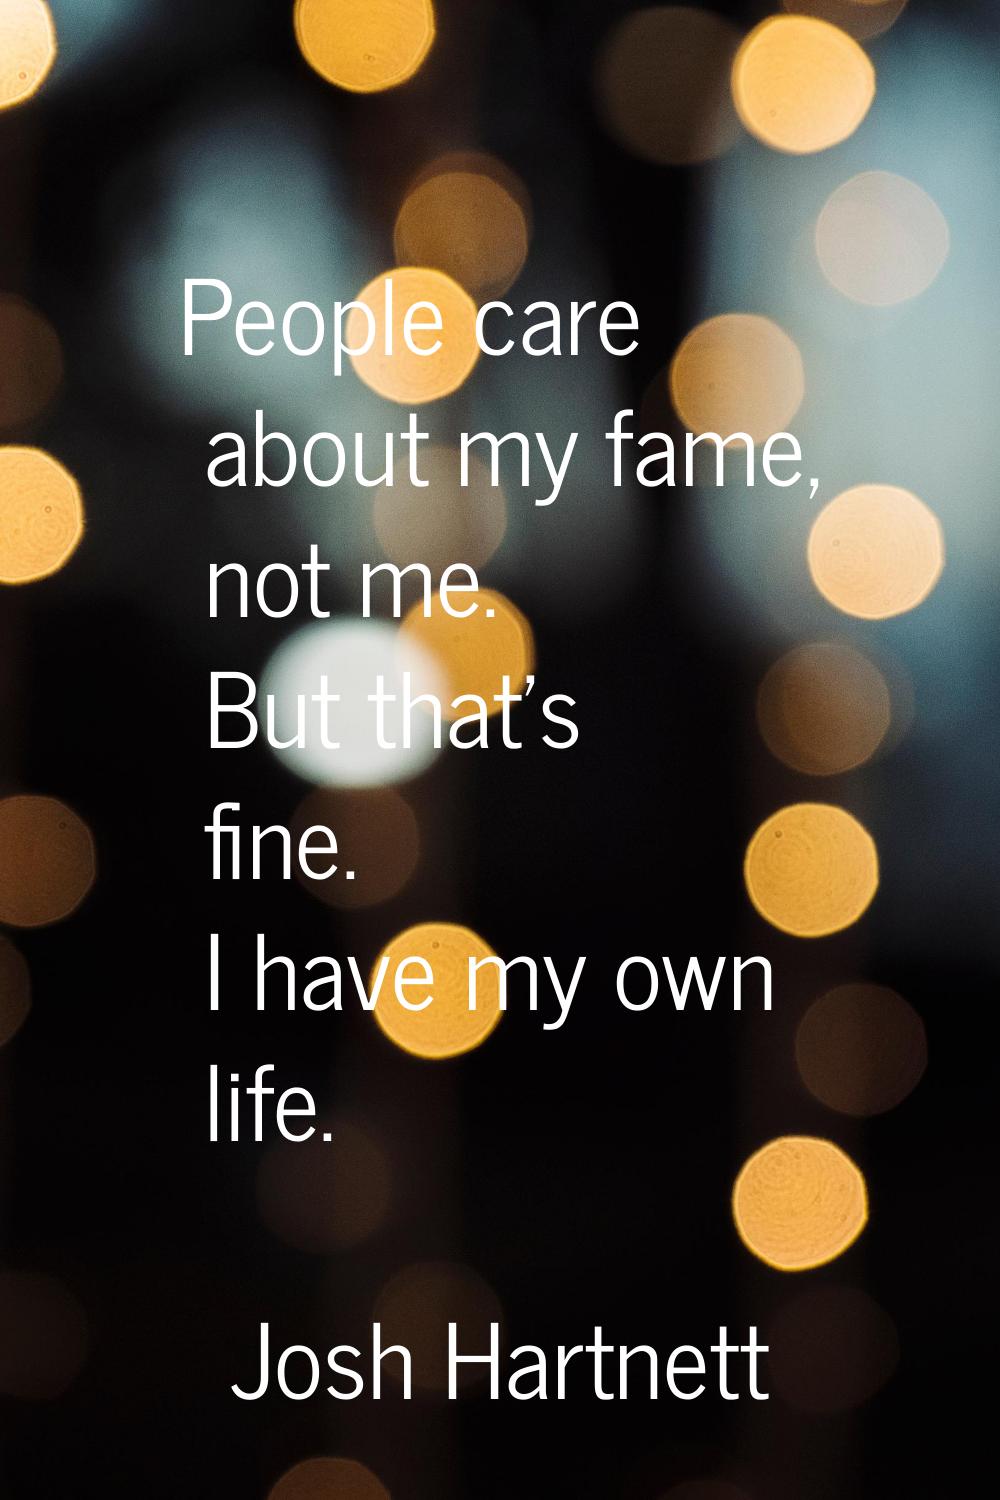 People care about my fame, not me. But that's fine. I have my own life.